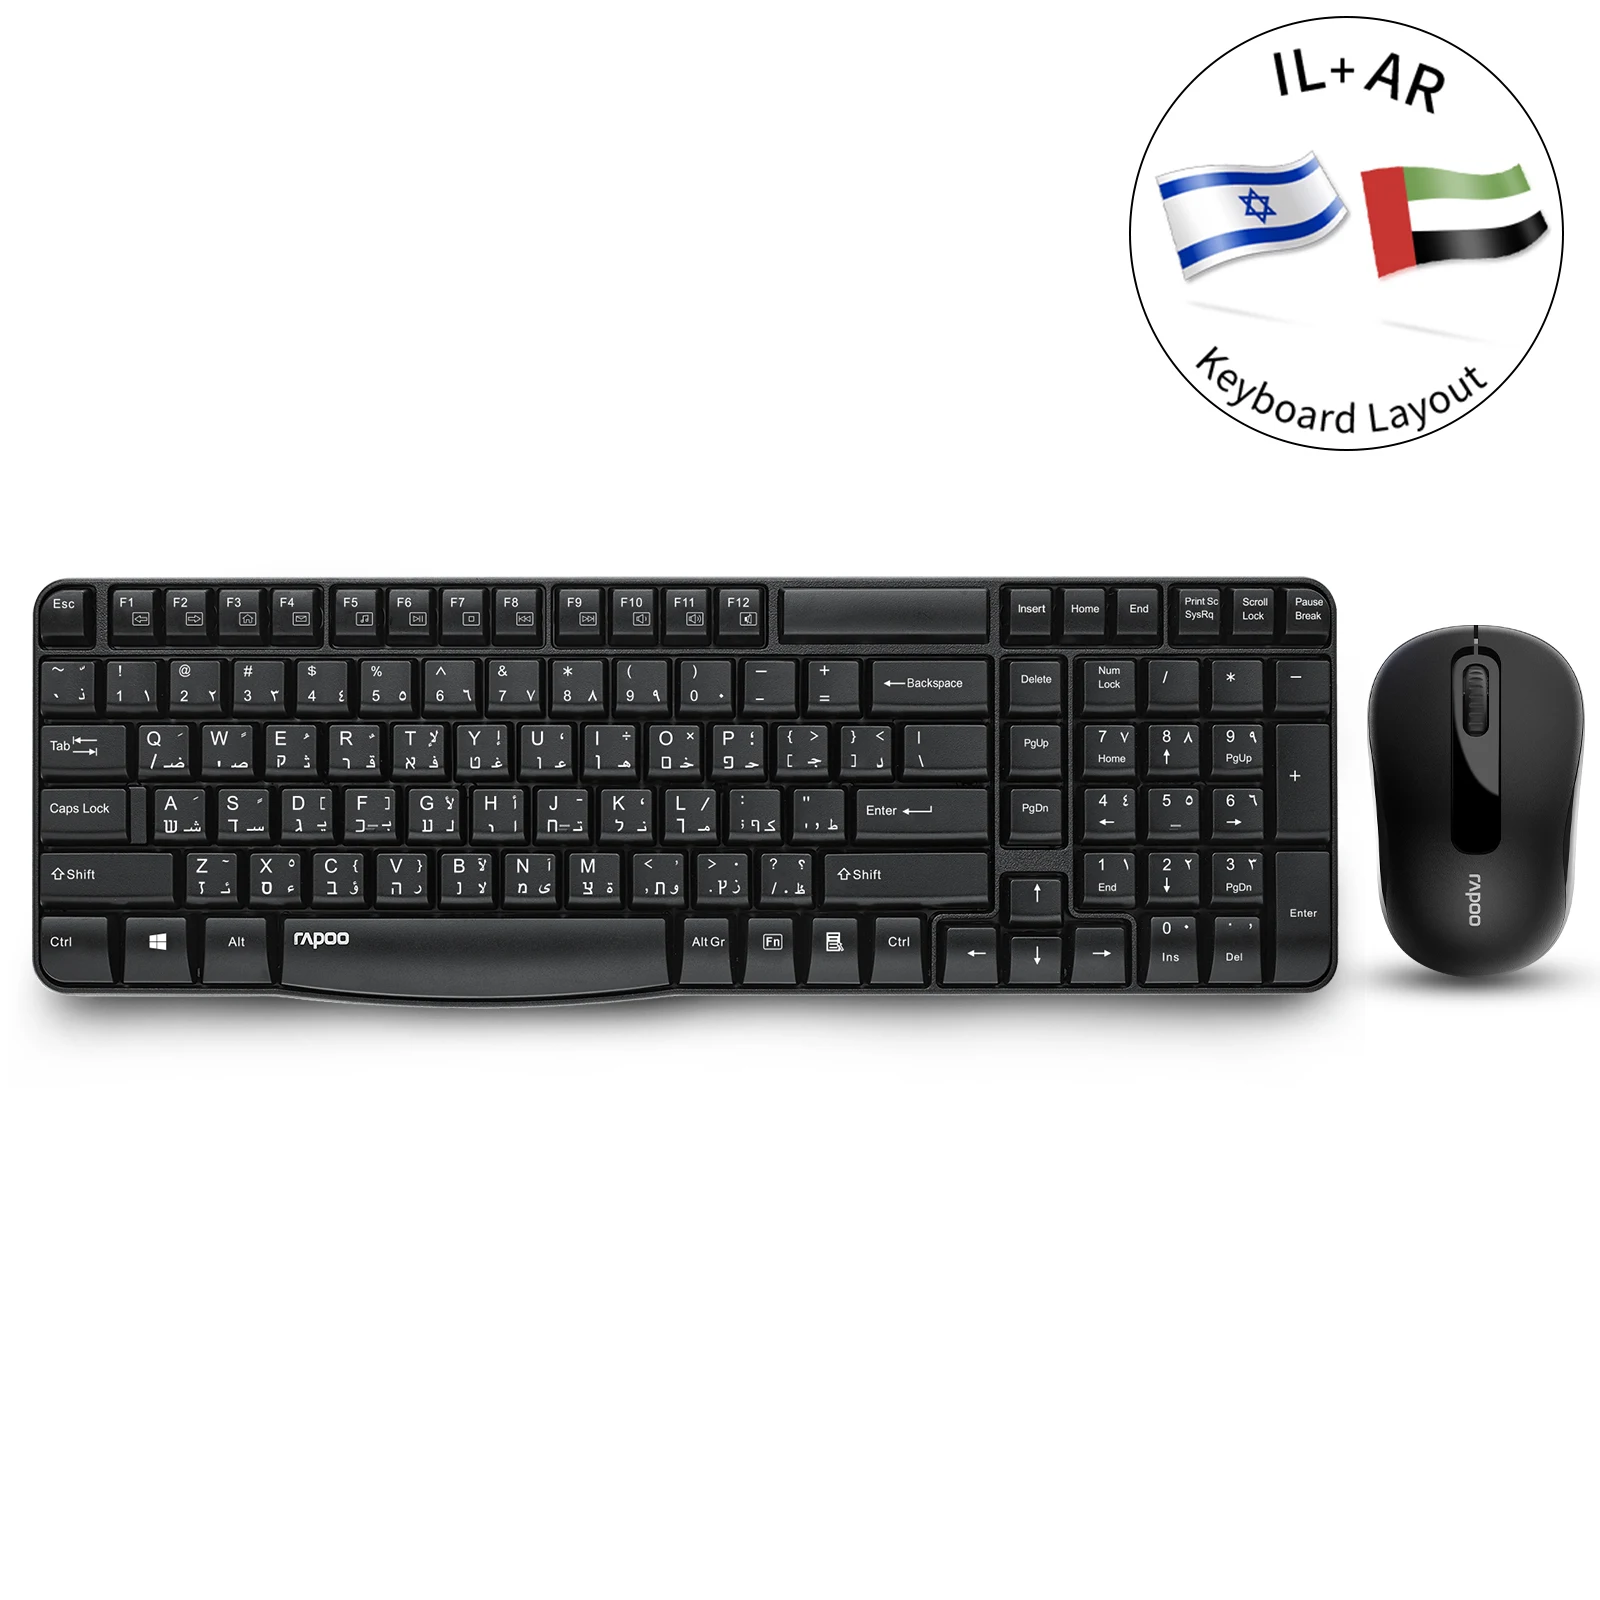 

Rapoo X1800S Wireless Optical Mouse and Keyboard Combo For PC Laptop Desktop Tablet Hebrew/Arabic Language